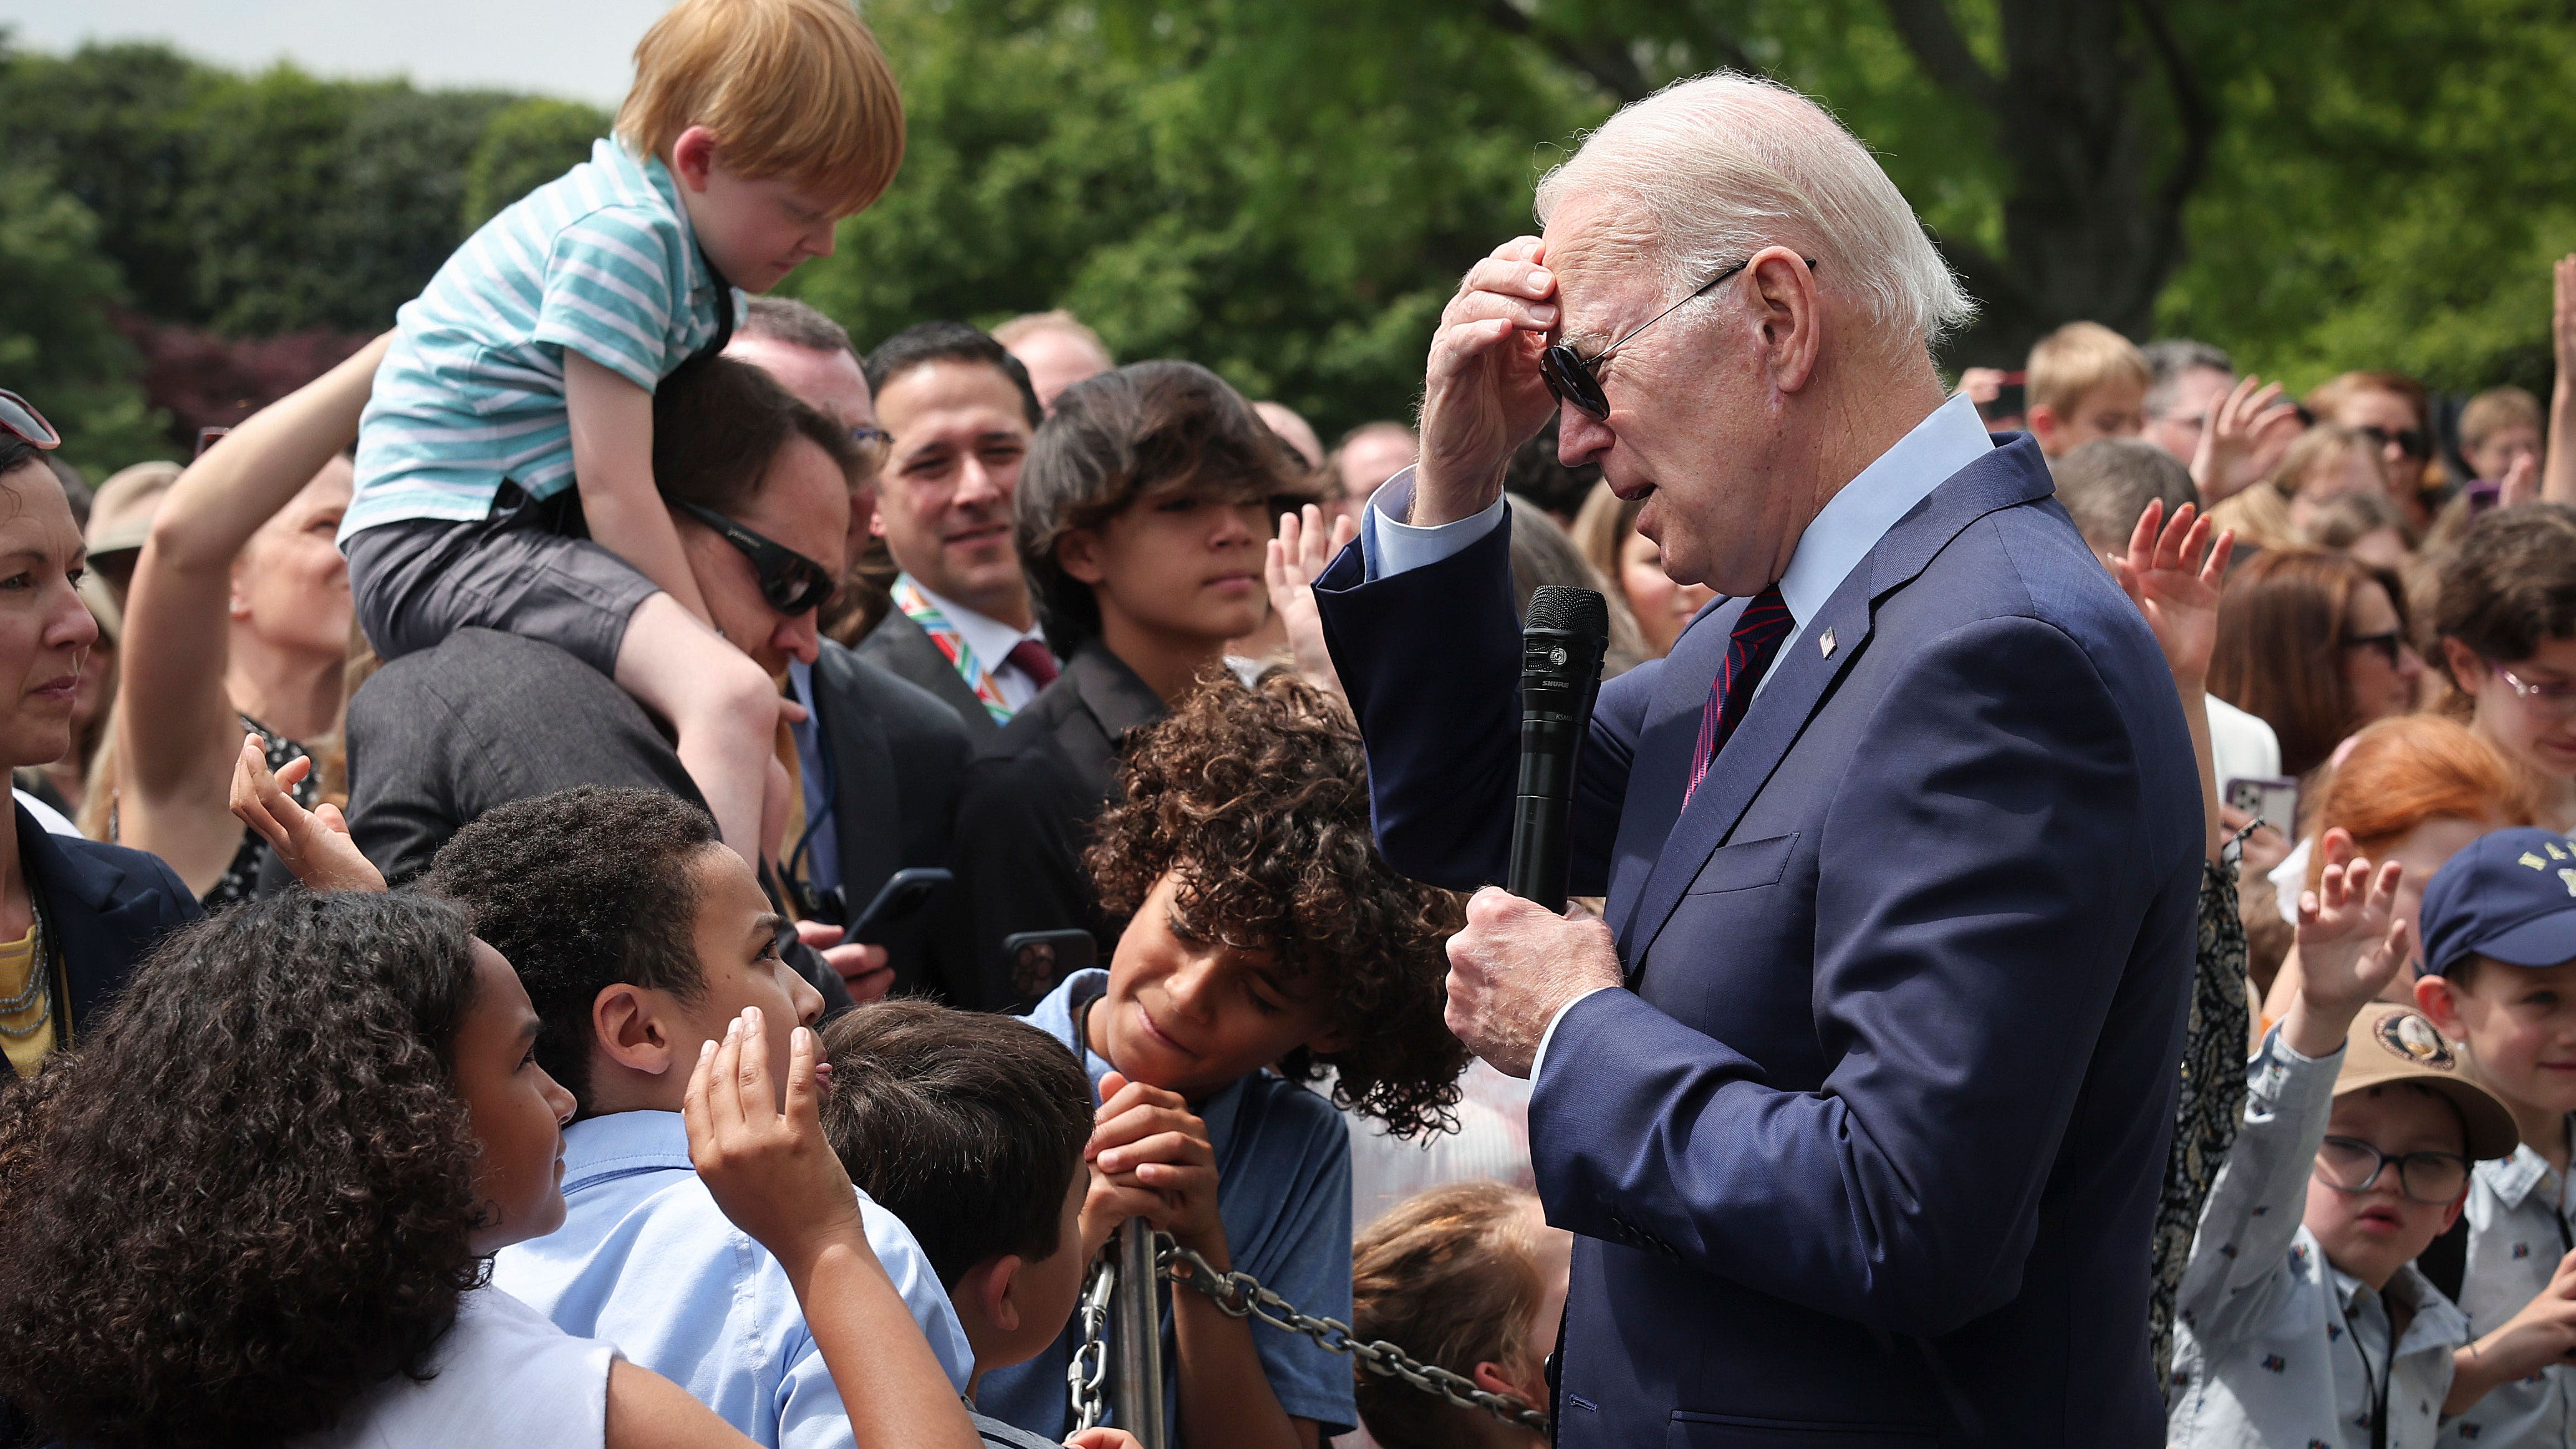 Even Biden advisers admit president's age is a liability, ‘diminished his energy’: Axios report